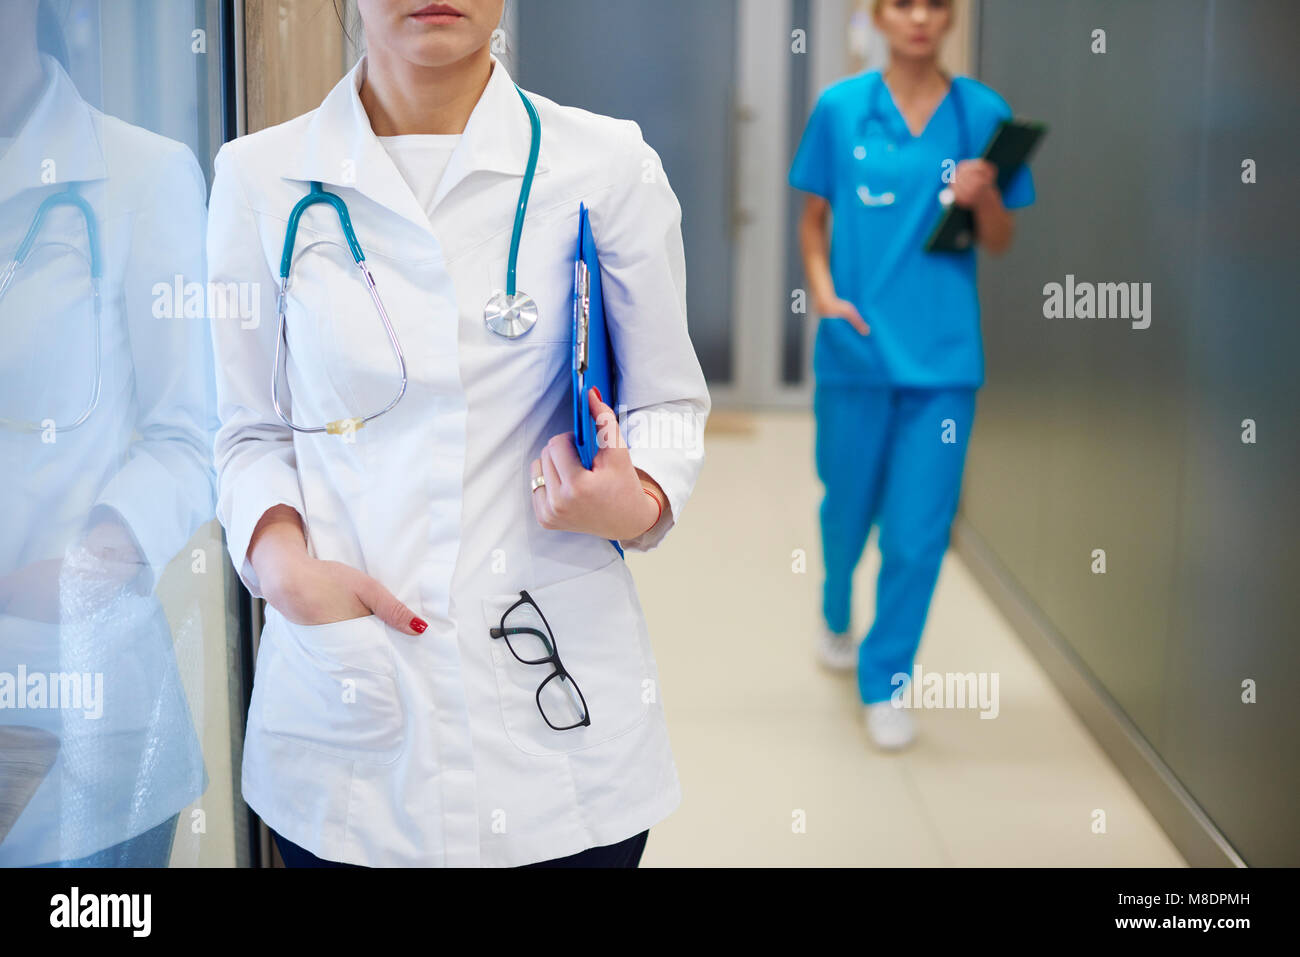 Doctor standing in hospital hallway, surgeon walking in background, mid section Stock Photo